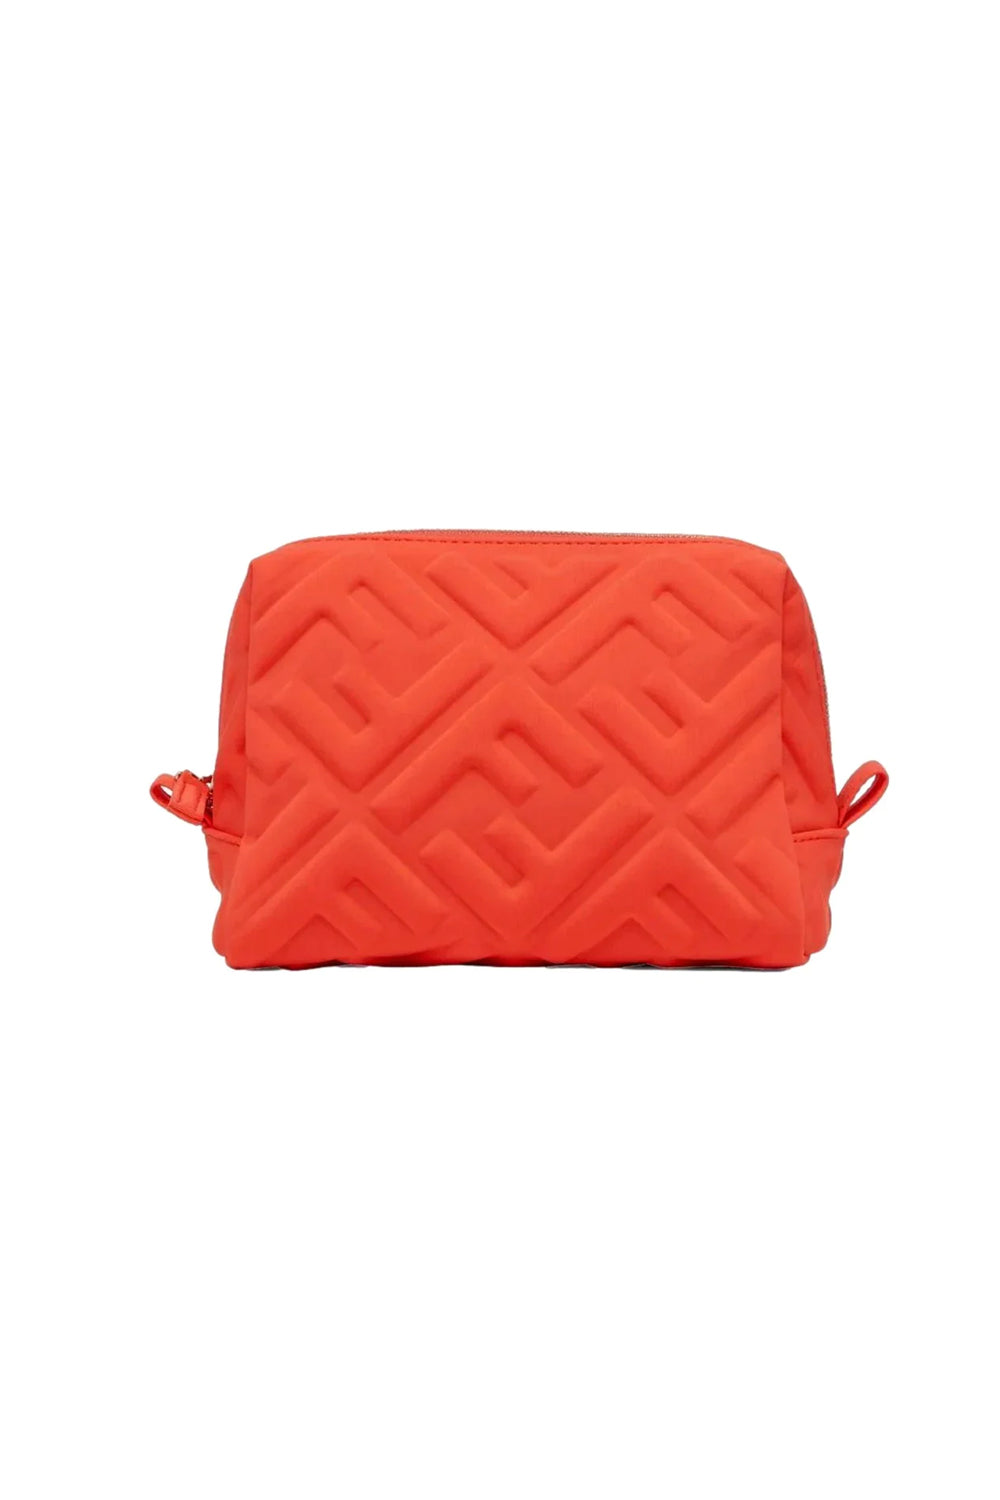 Fendi FF Embossed Lycra Tulip Cosmetic Pouch